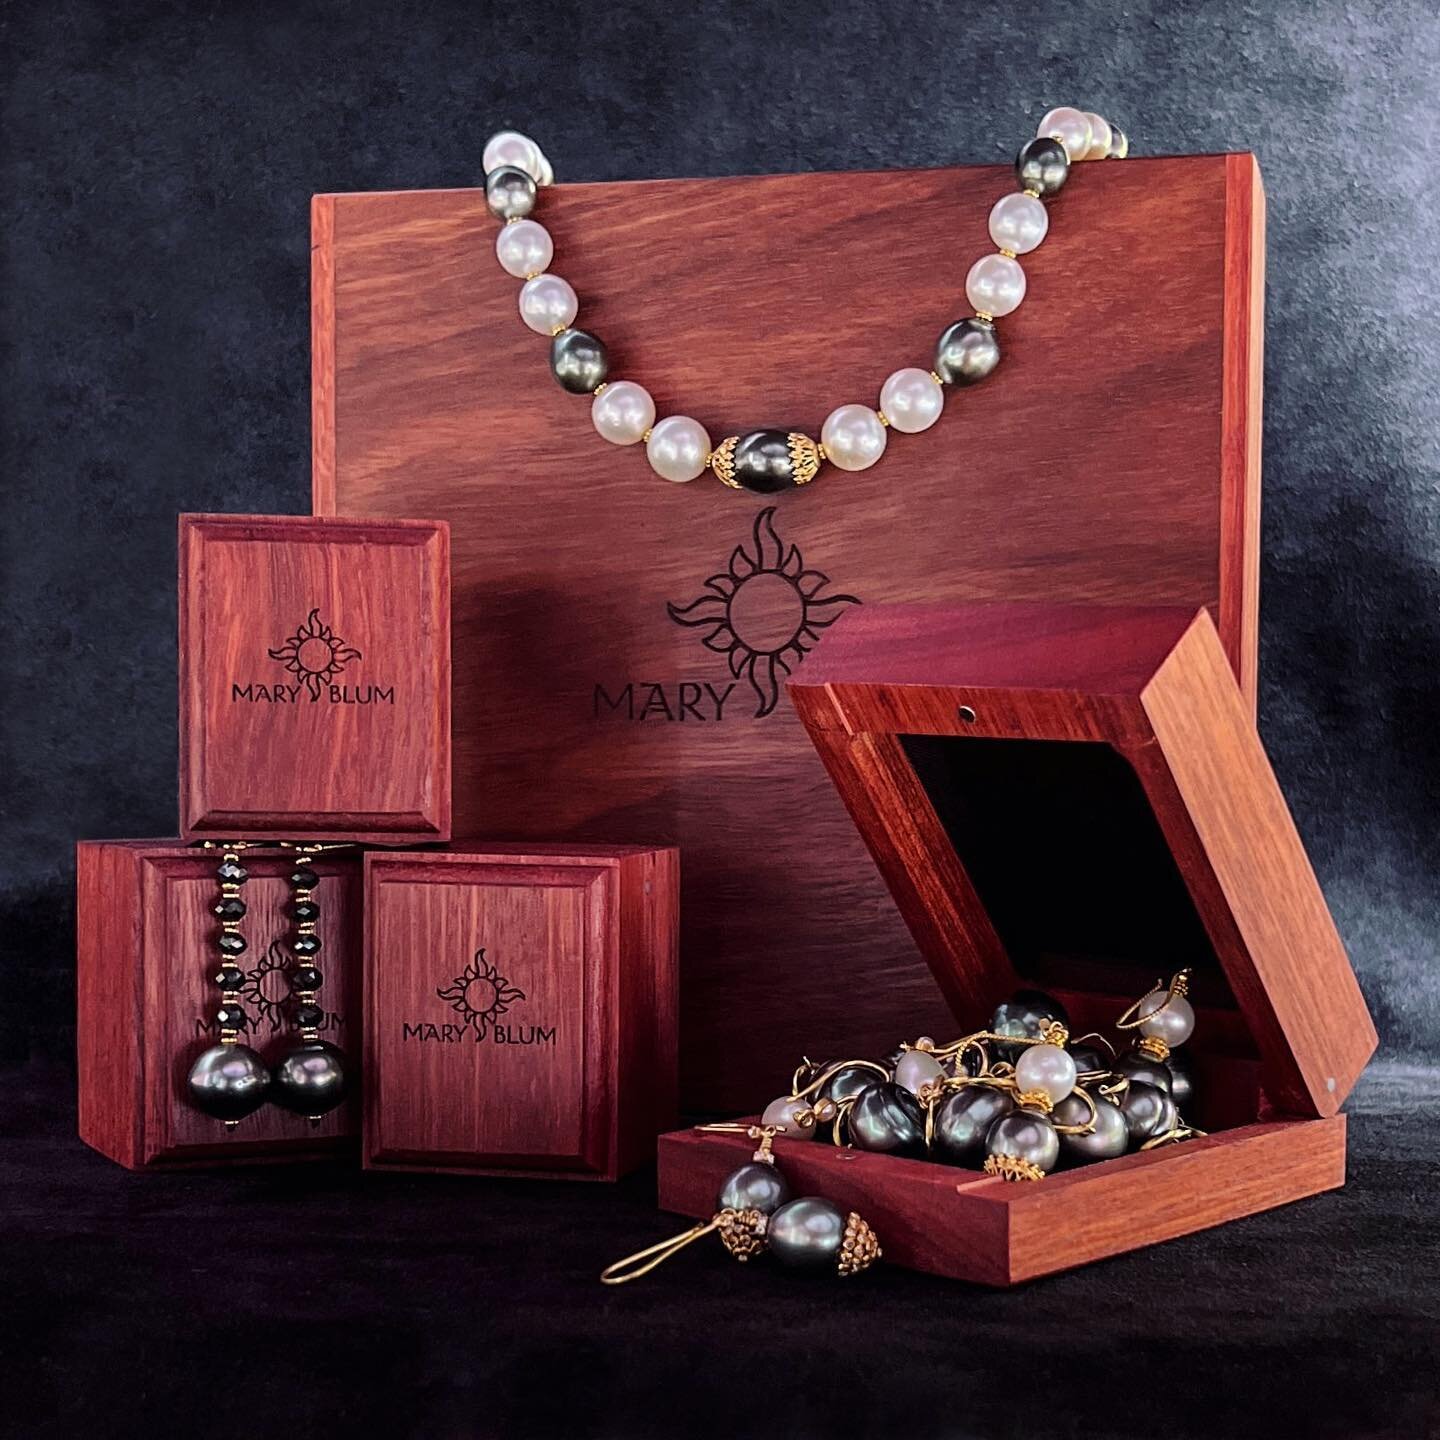 pirate treasure or dragon hoard? a collection of South Sea pearls, diamonds and 18K gold&hellip;

#18kgold #southseapearls #tahitianpearls #diamonds #artisanmade #benchjeweler @givepackaging